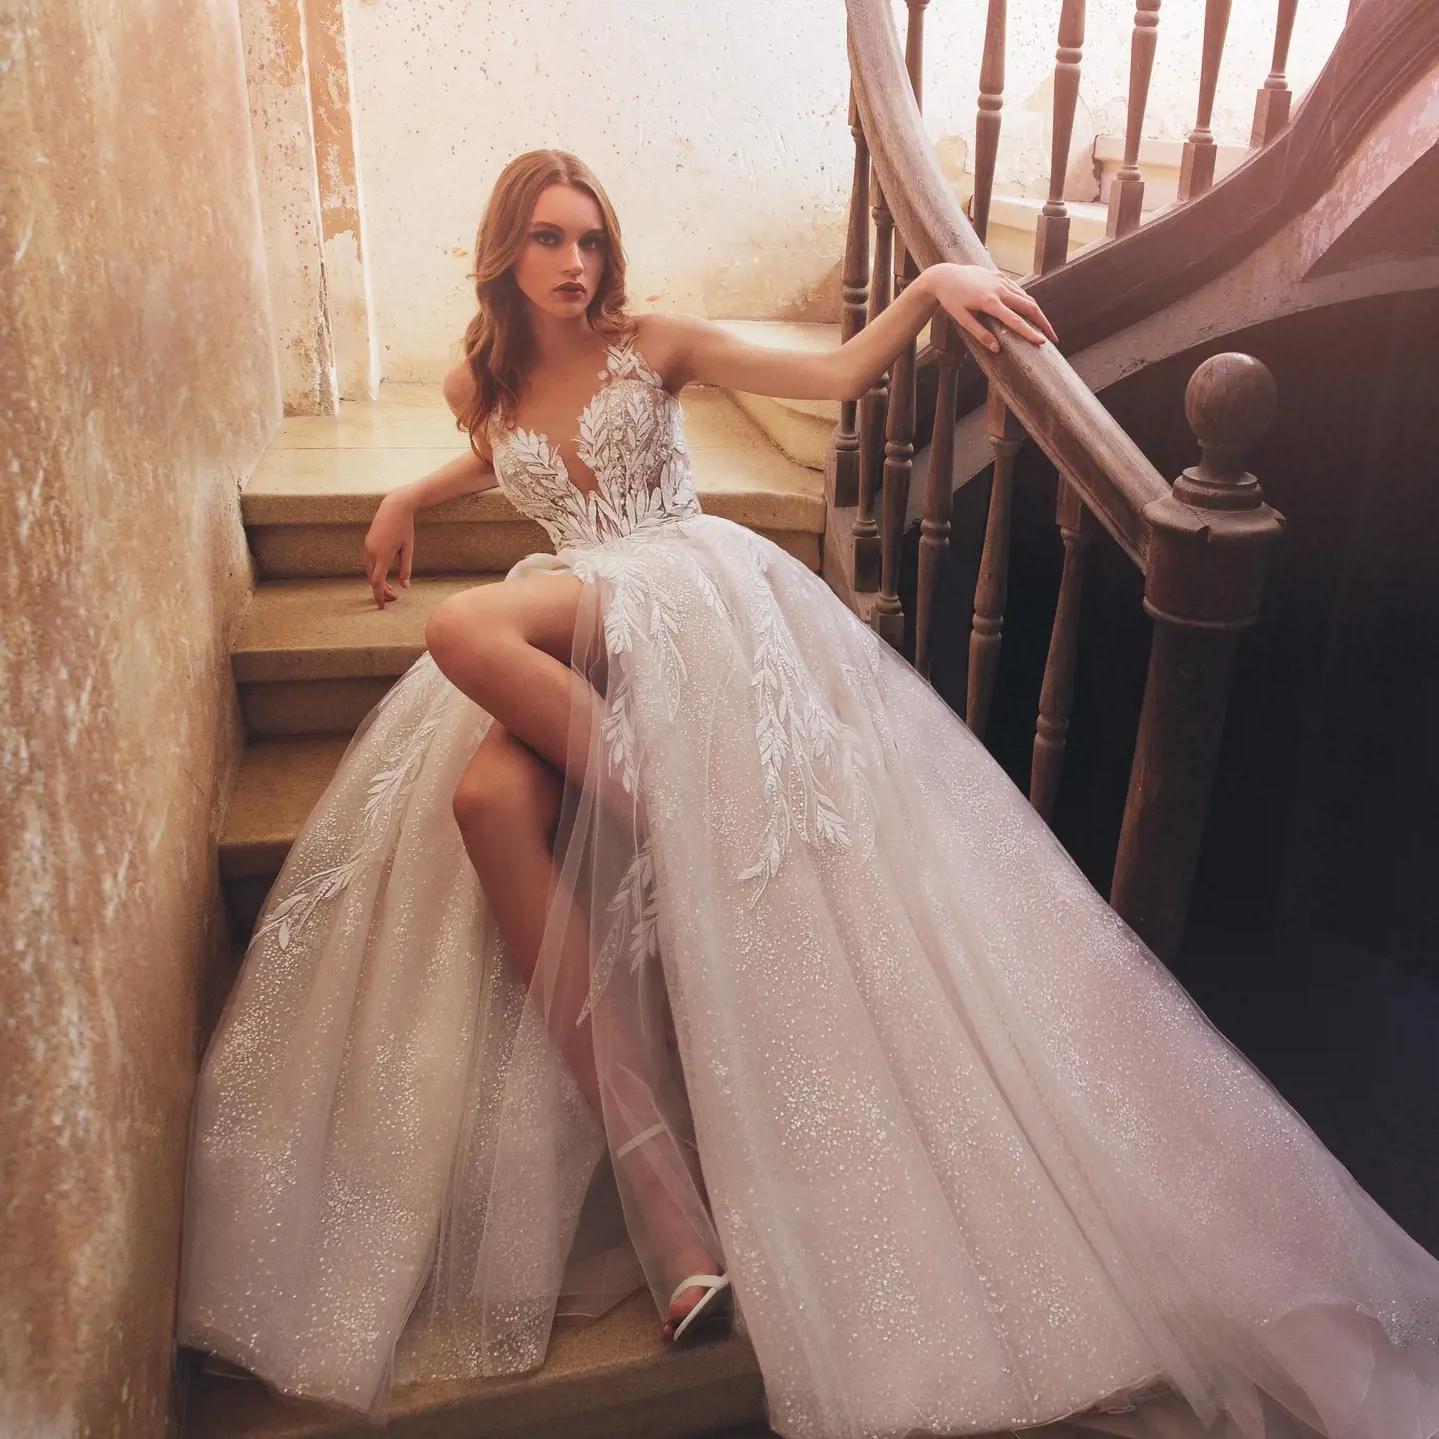 Model wearing a bridal gown. Mobile image